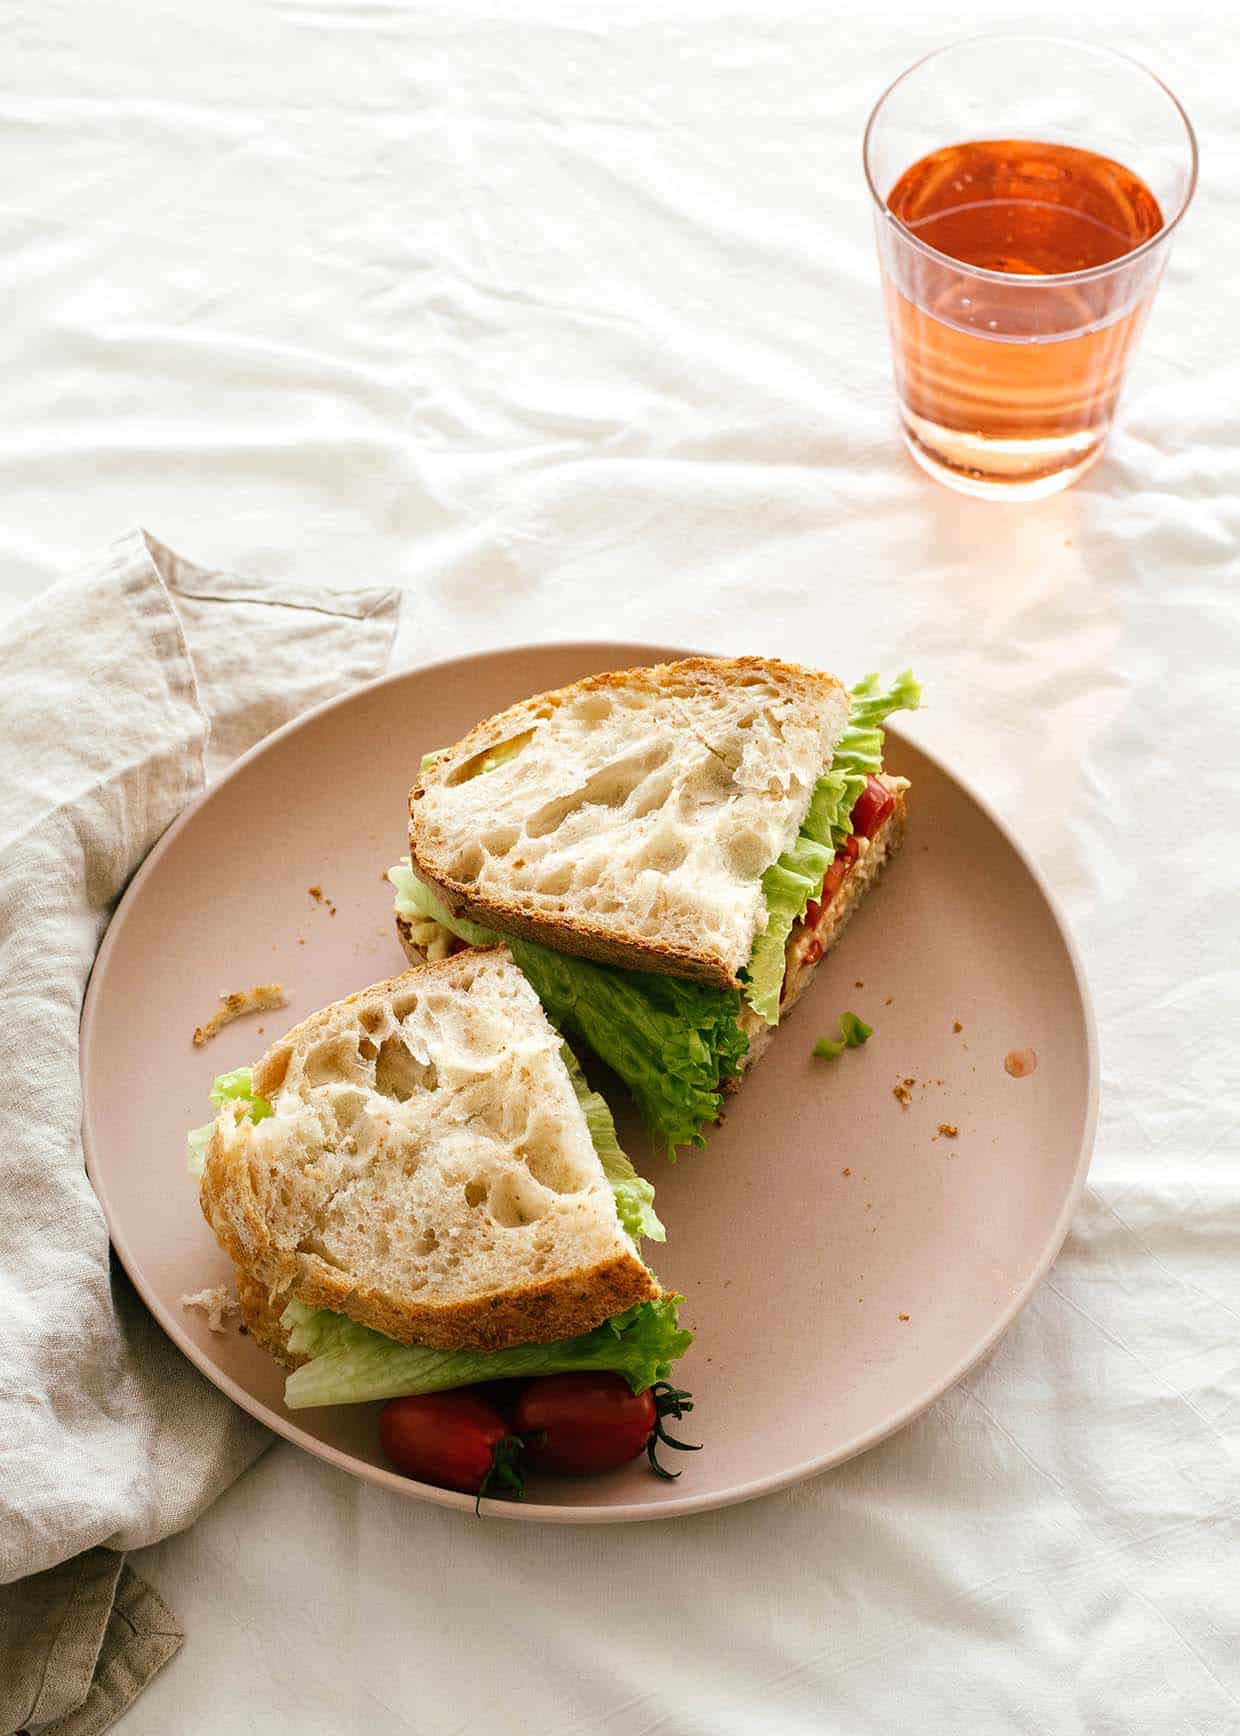 sourdough sandwich with chickpea tuna salad, lettuce and tomatoes